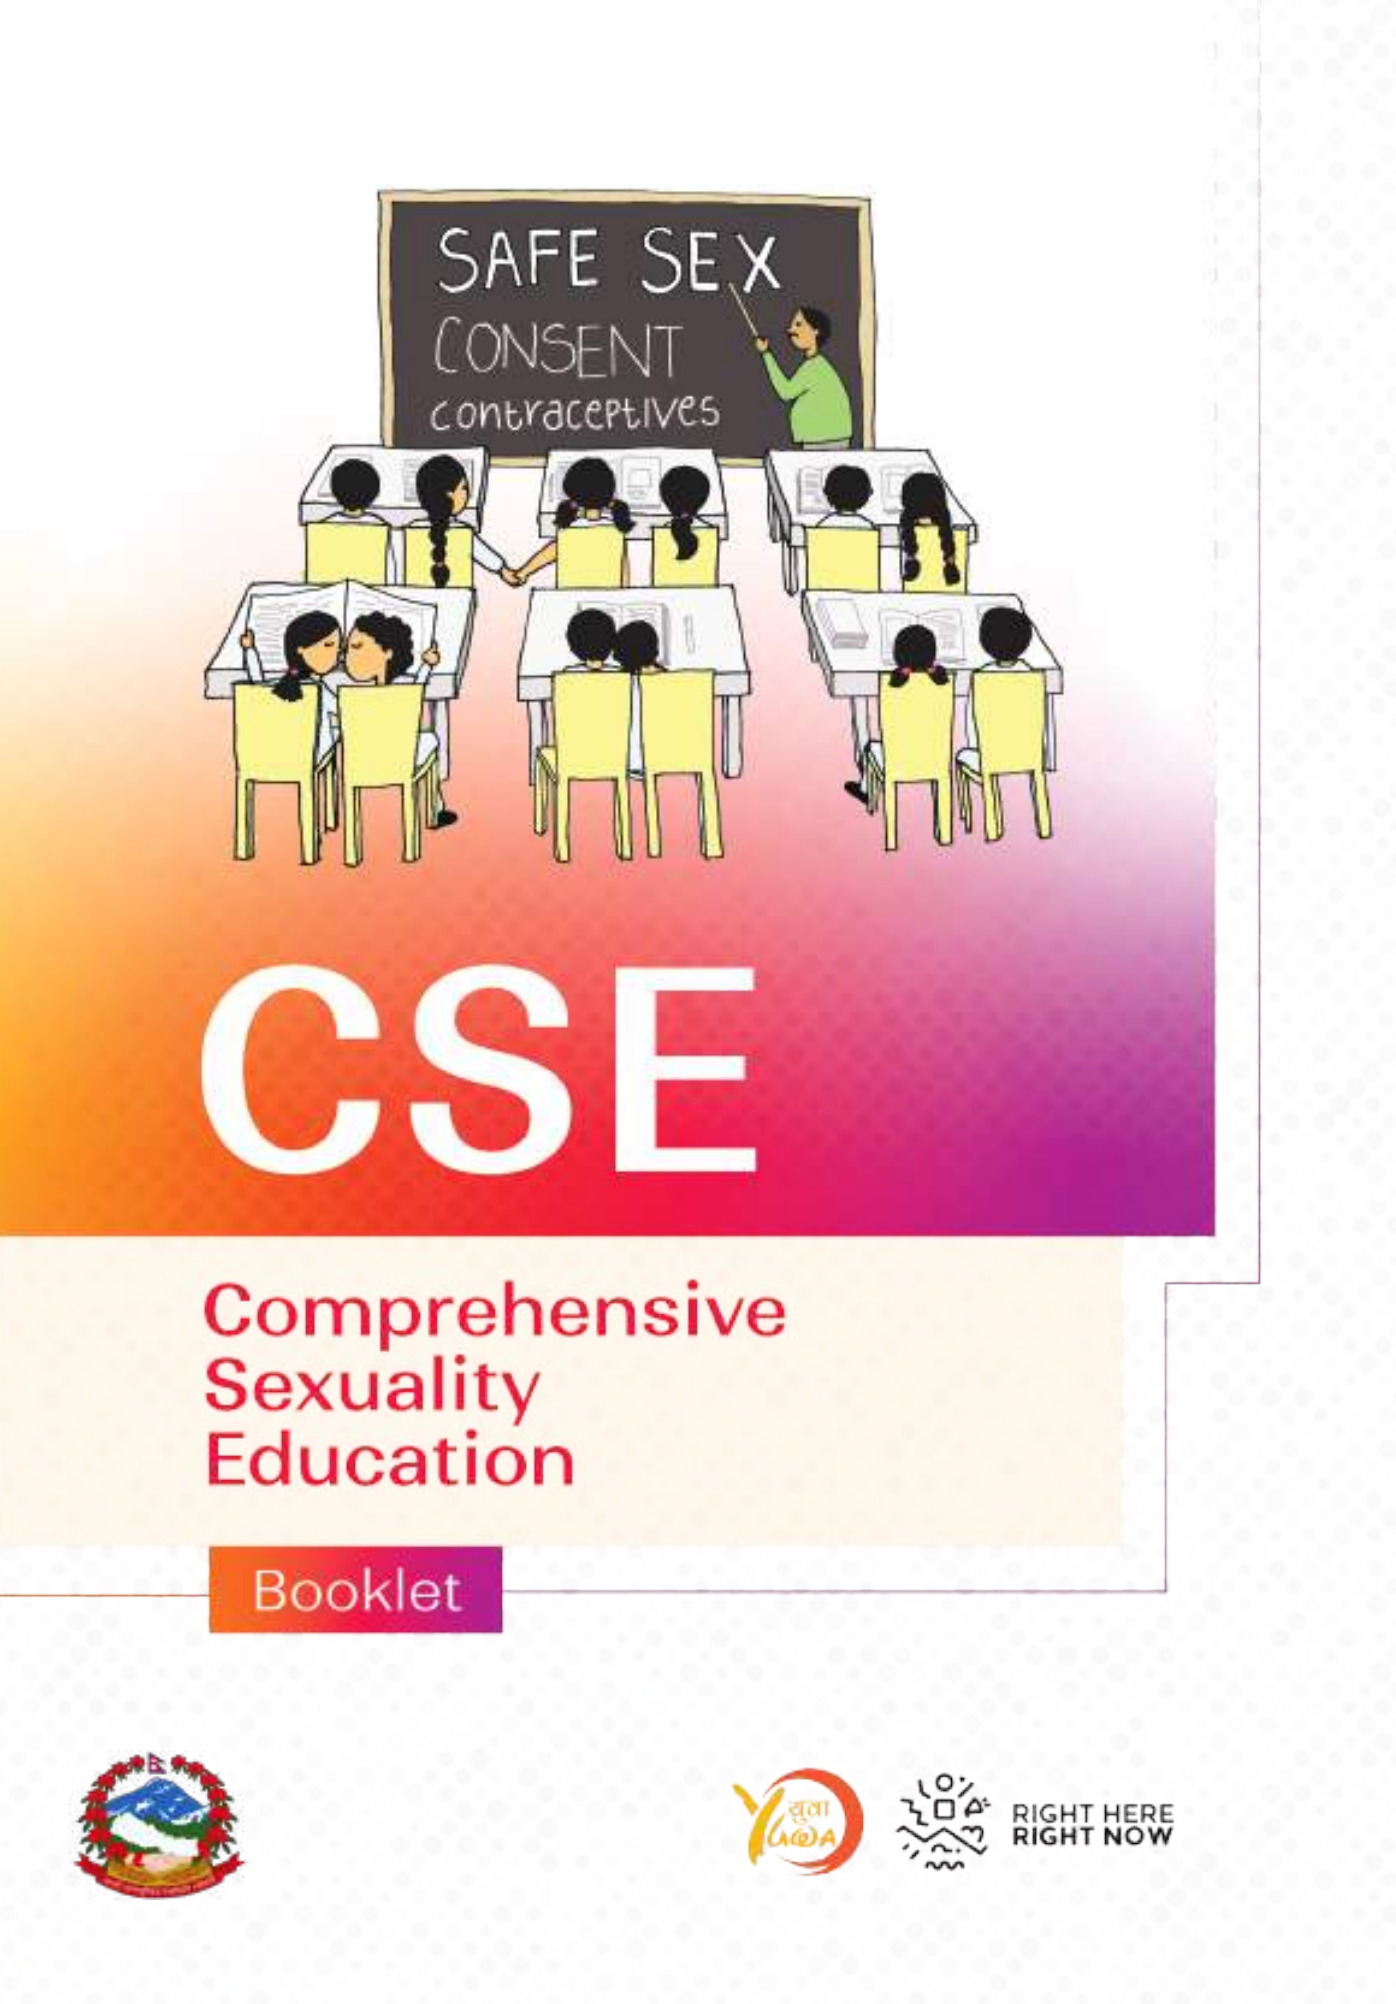 Comprehensive Sexuality Education (CSE) Booklet